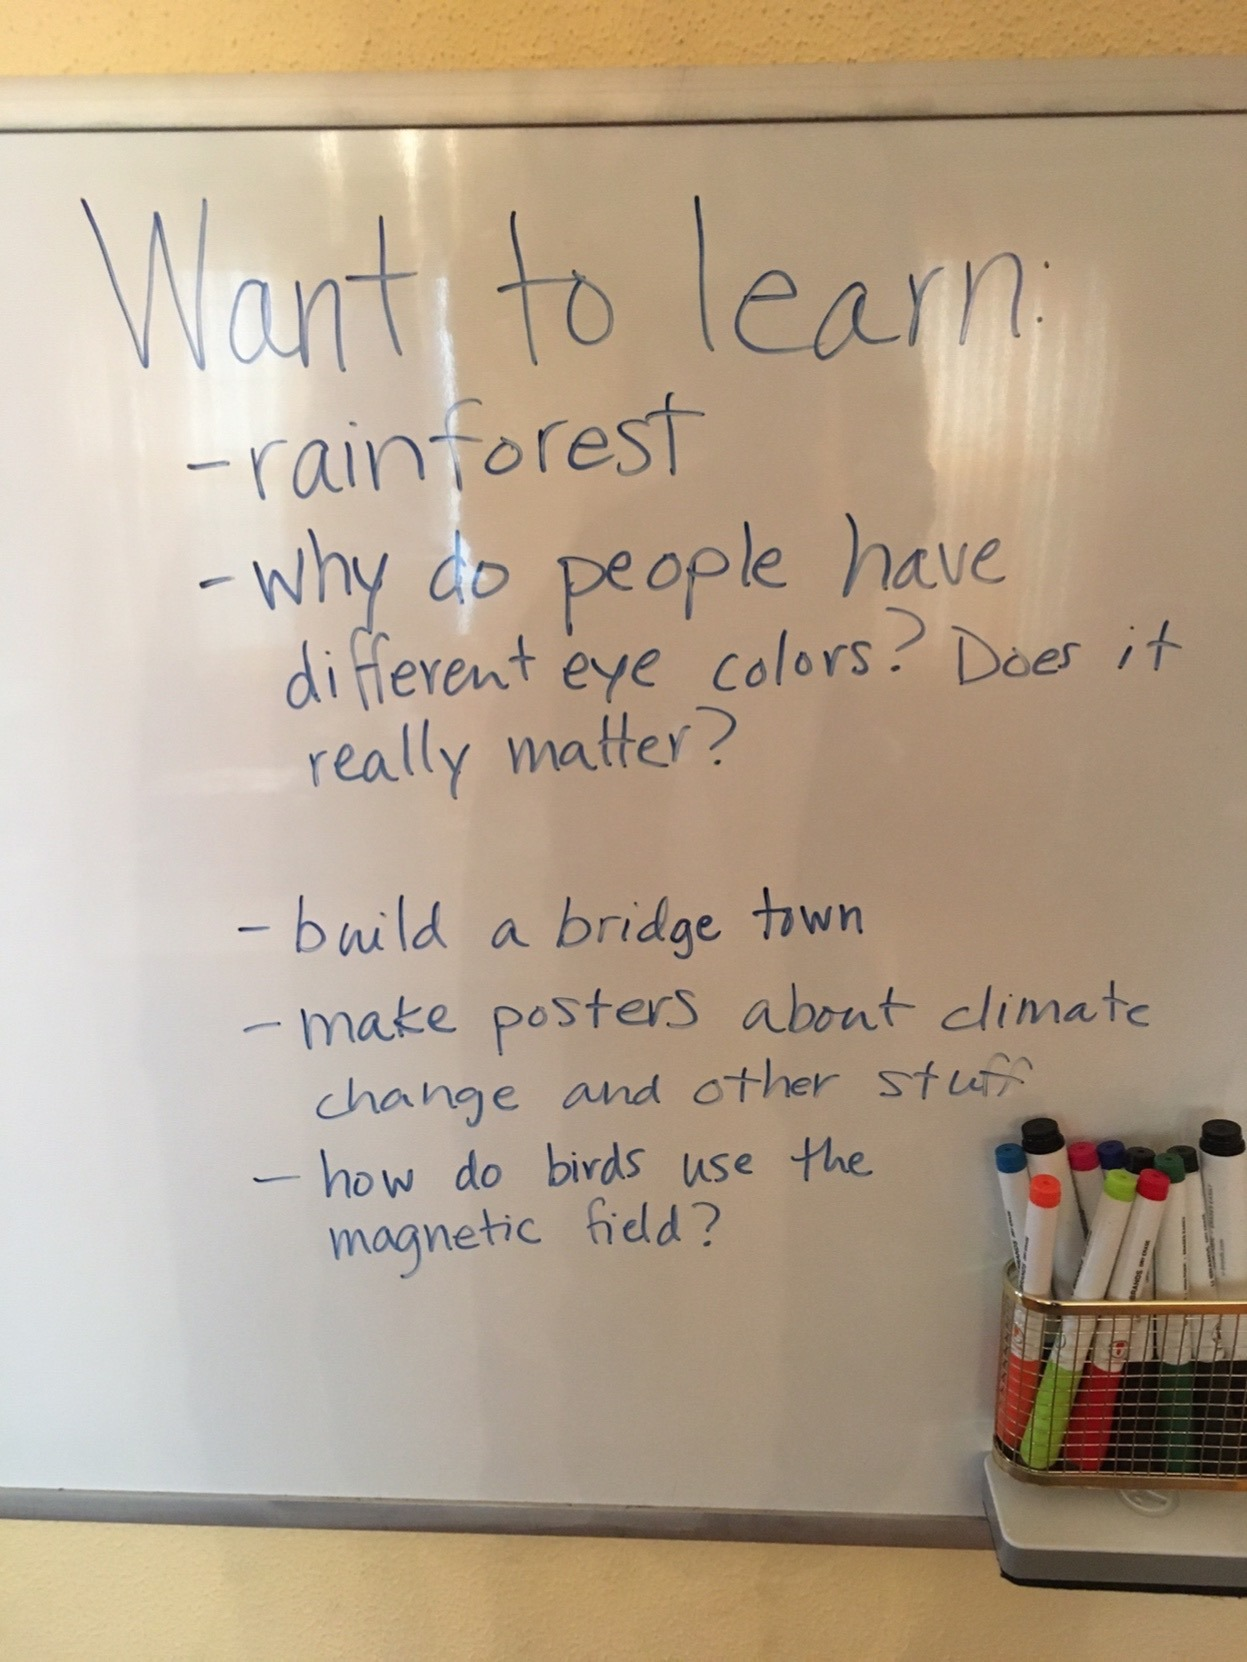 Written on a whiteboard: "Want to learn: - rainforest -why do people have different eye colors? Does it really matter? - build a bridge town - make posters about climate change and other stuff - how do birds use the magnetic field?"